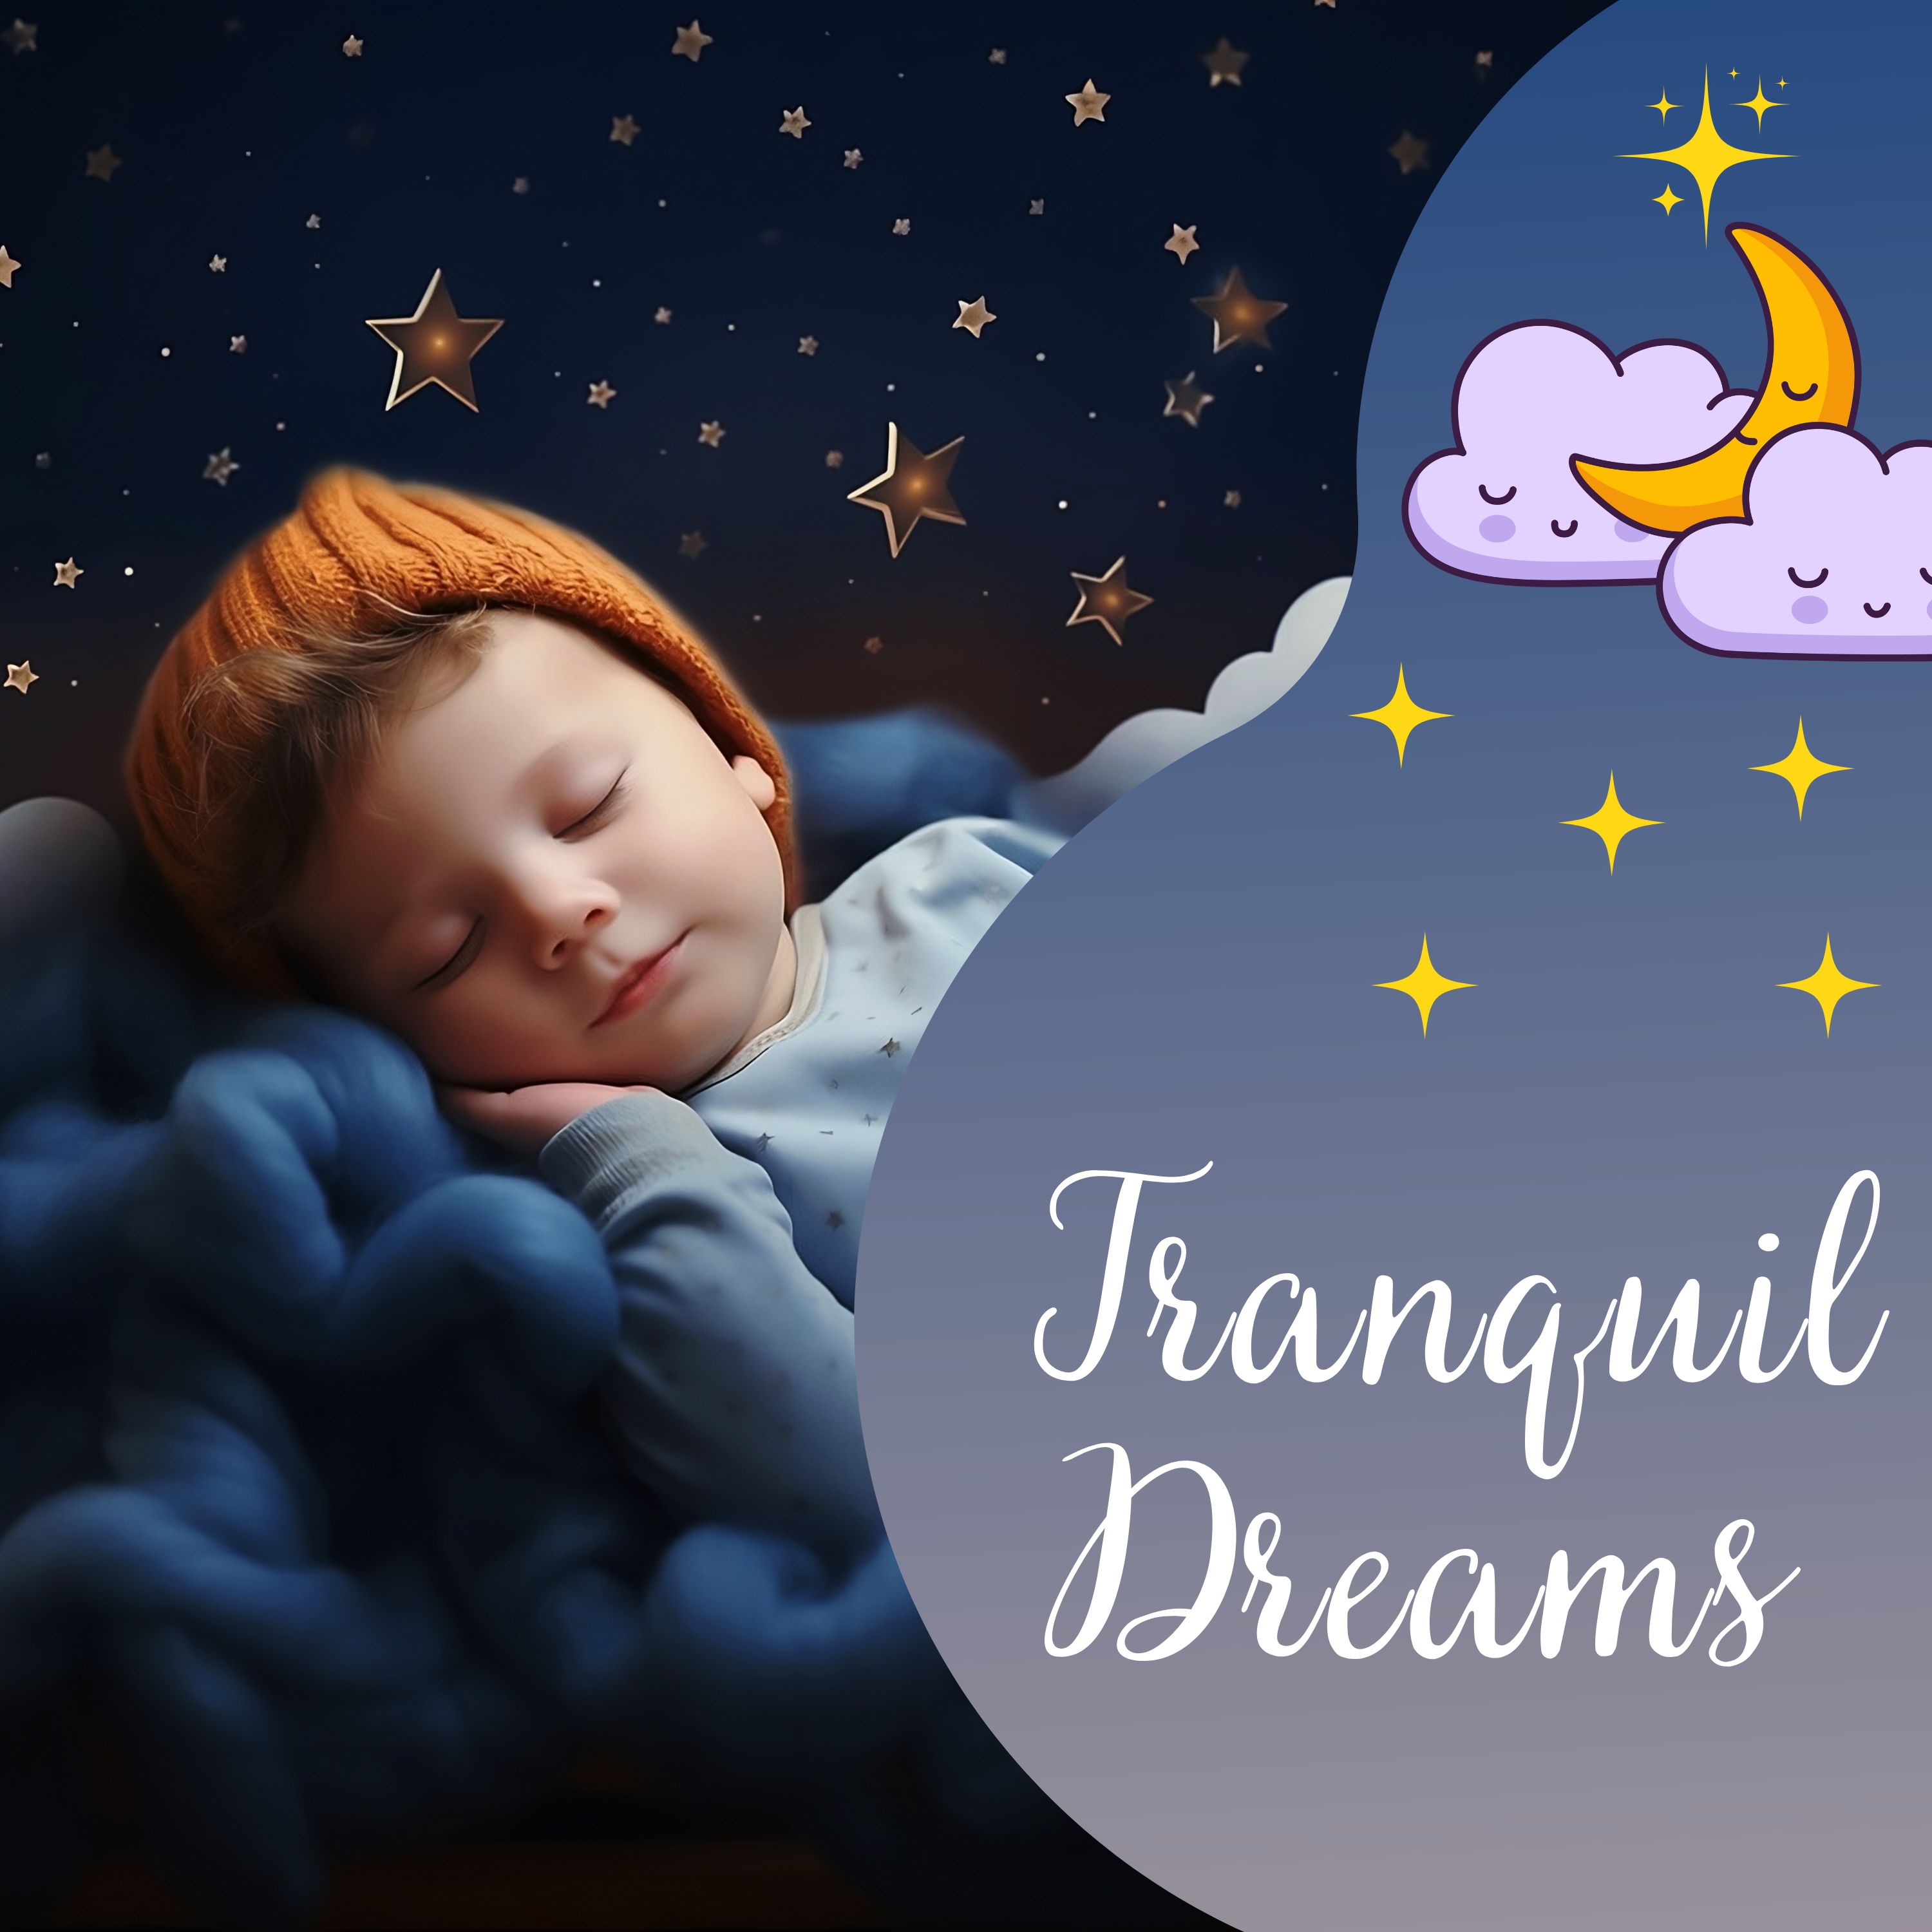 Tranquil Dreams